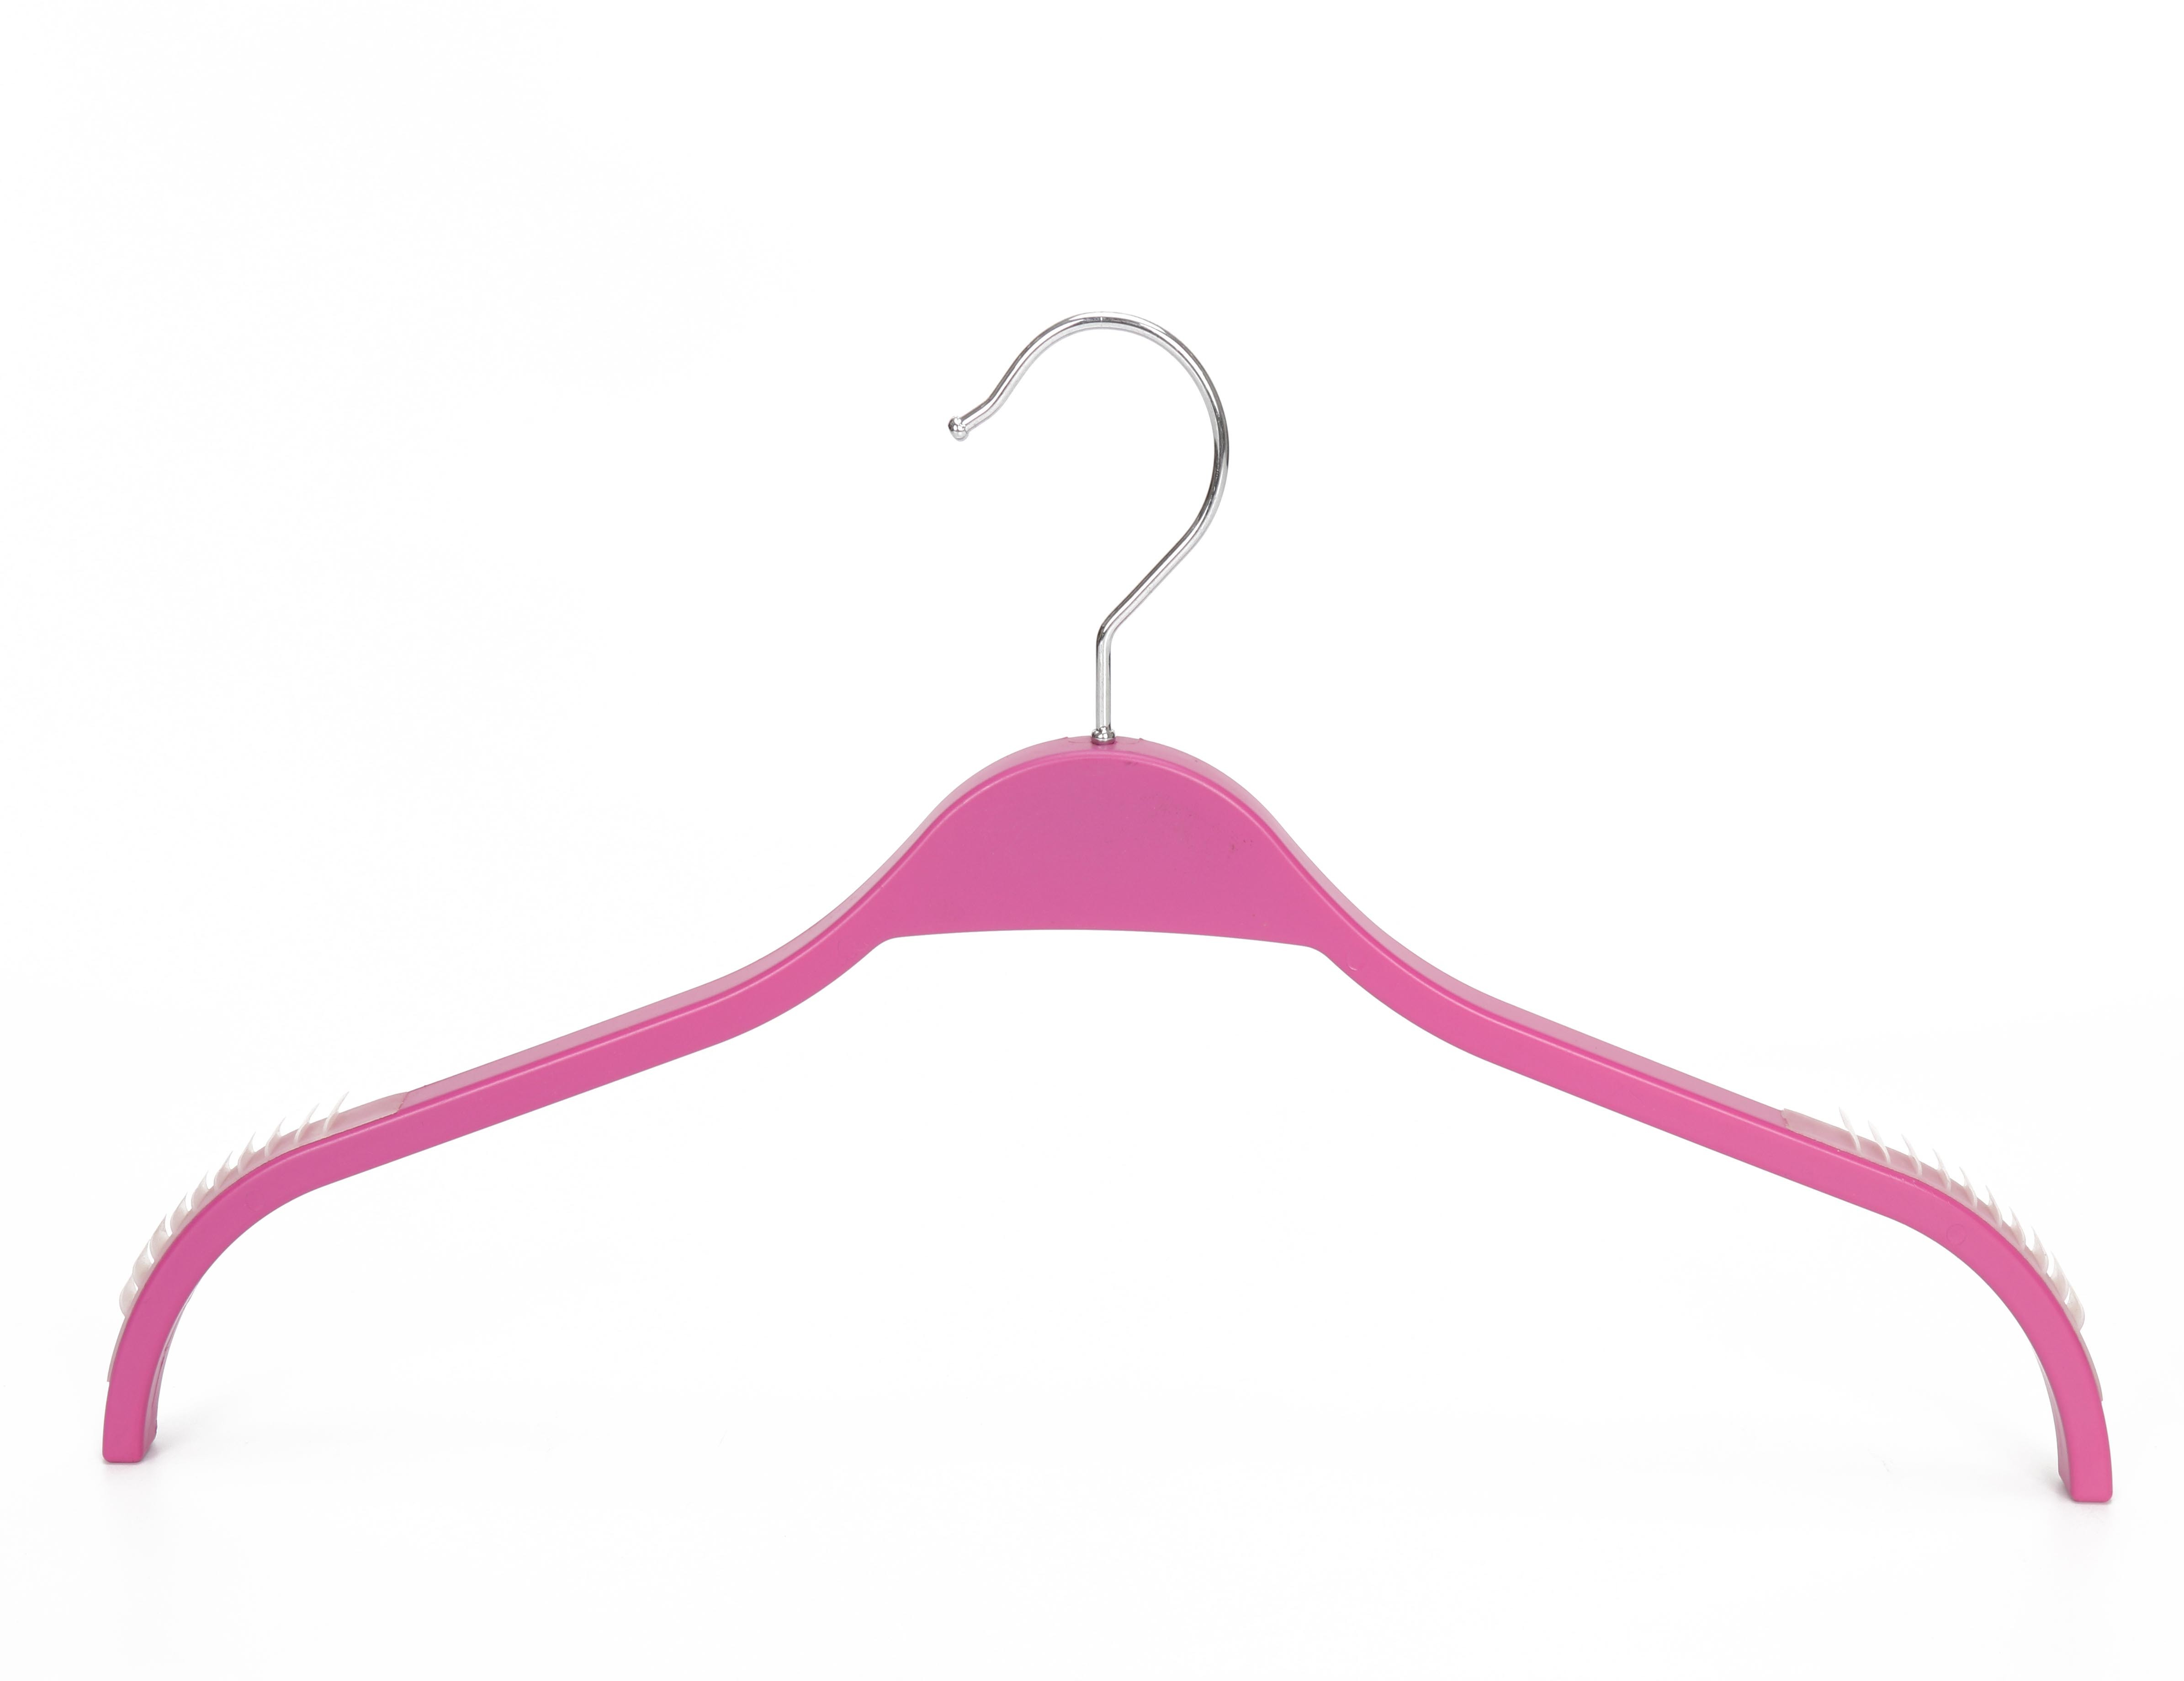 /proimages/2f0j00WtfUOBaCsEbM/fashion-style-cheap-plastic-clothes-hanger-colorful-for-display.jpg